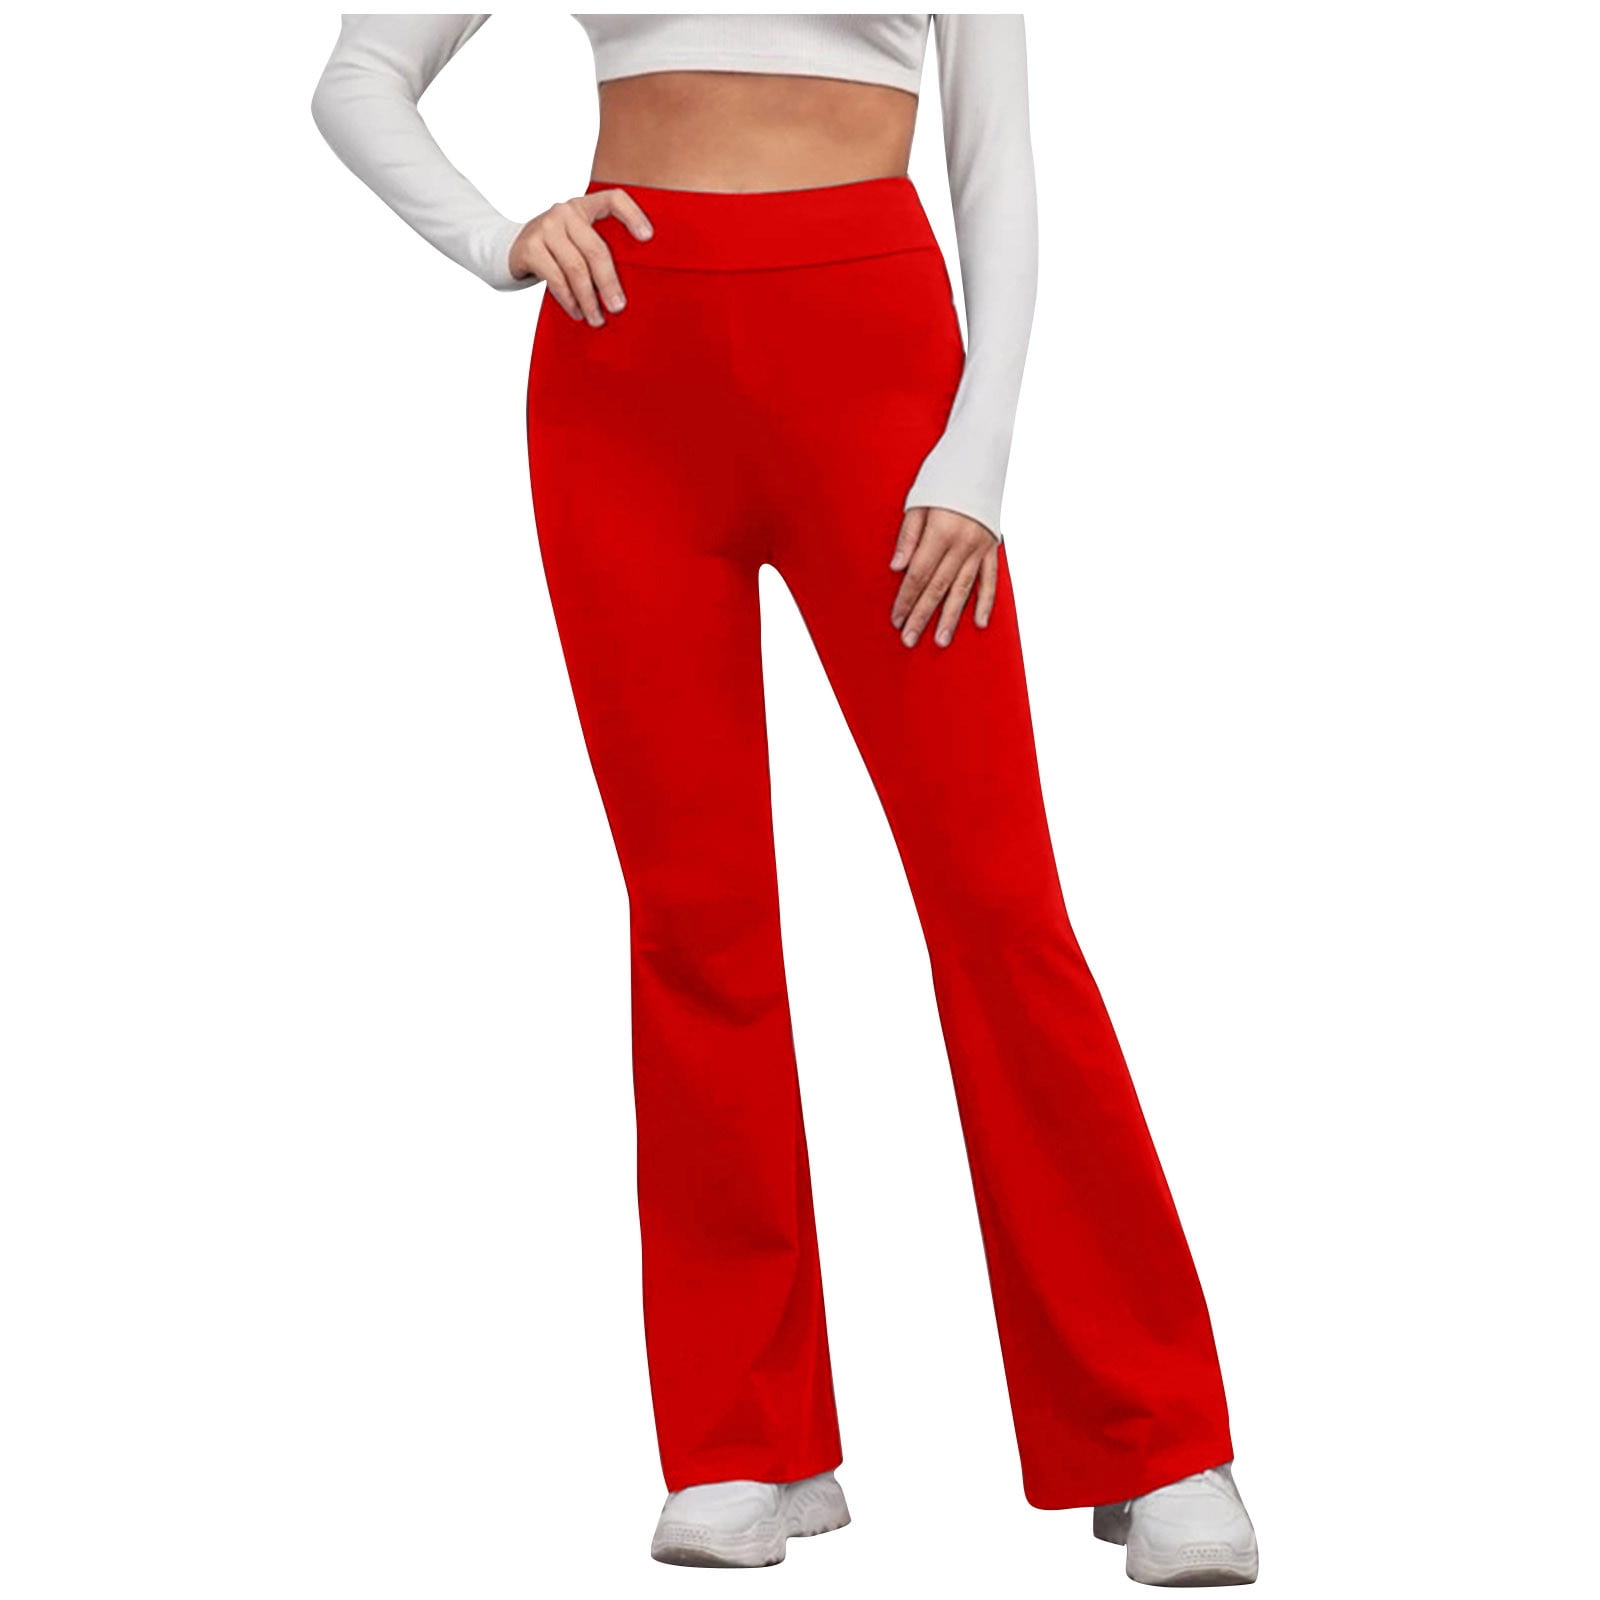  Bootcut Yoga Pants For Women Tummy Control Workout Bootleg  DressPants High Waist 4 Way Stretch Pants Y52A-Red-S